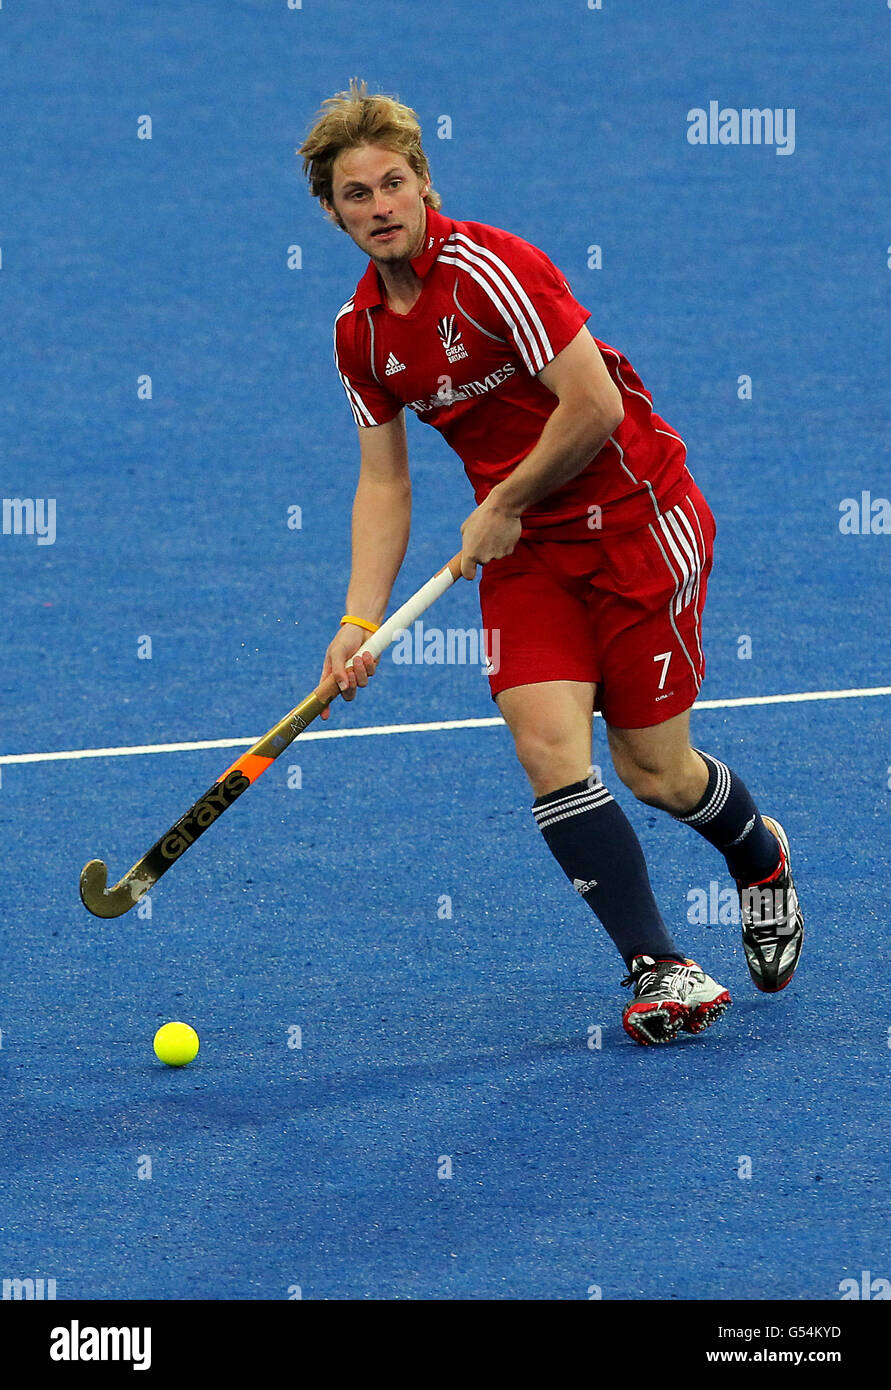 Great Britain's Ashley Jackson in action against India during the Visa International Invitational Hockey Tournament at the Riverbank Arena, London. Stock Photo